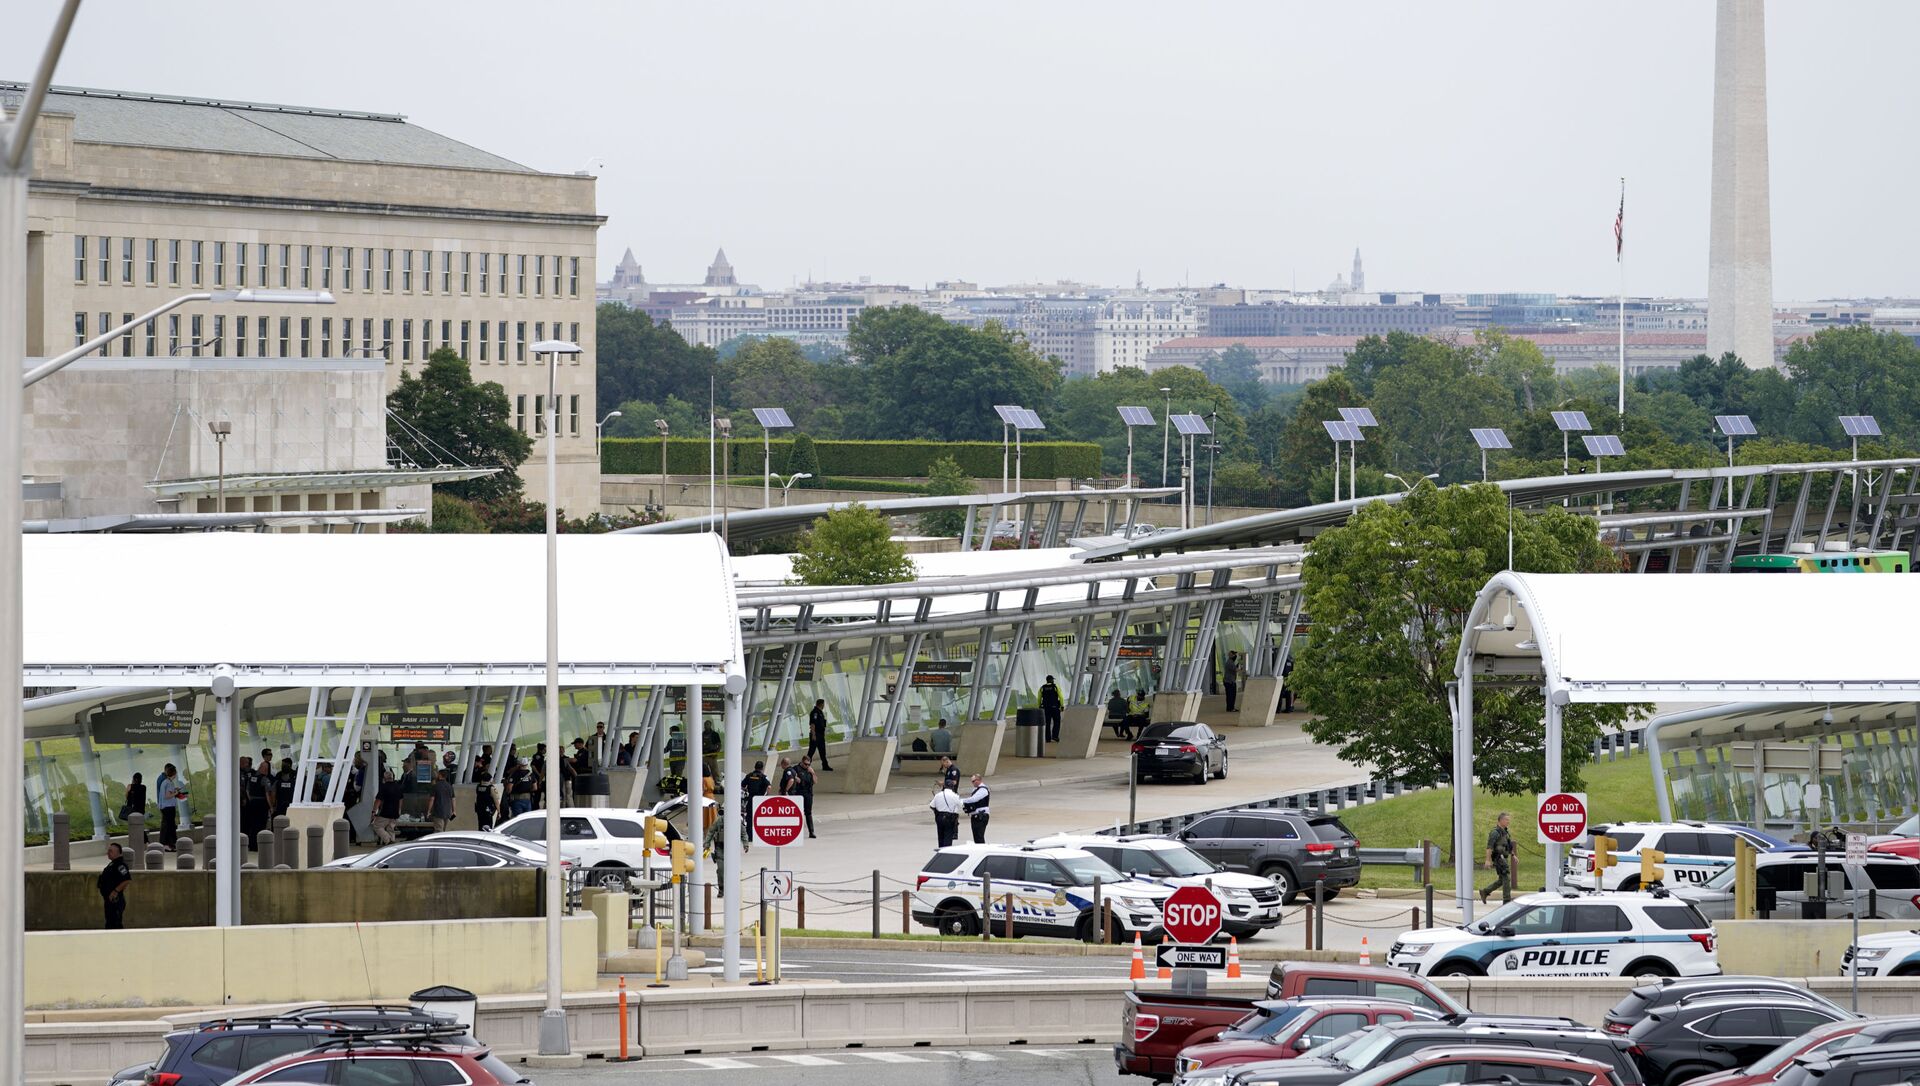 With the Washington Monument in the background, police vehicles are seen outside the Pentagon Metro area Tuesday, Aug. 3, 2021, at the Pentagon in Washington. The Pentagon is on lockdown after multiple gunshots were fired near a platform by the facility's Metro station. - Sputnik International, 1920, 03.08.2021